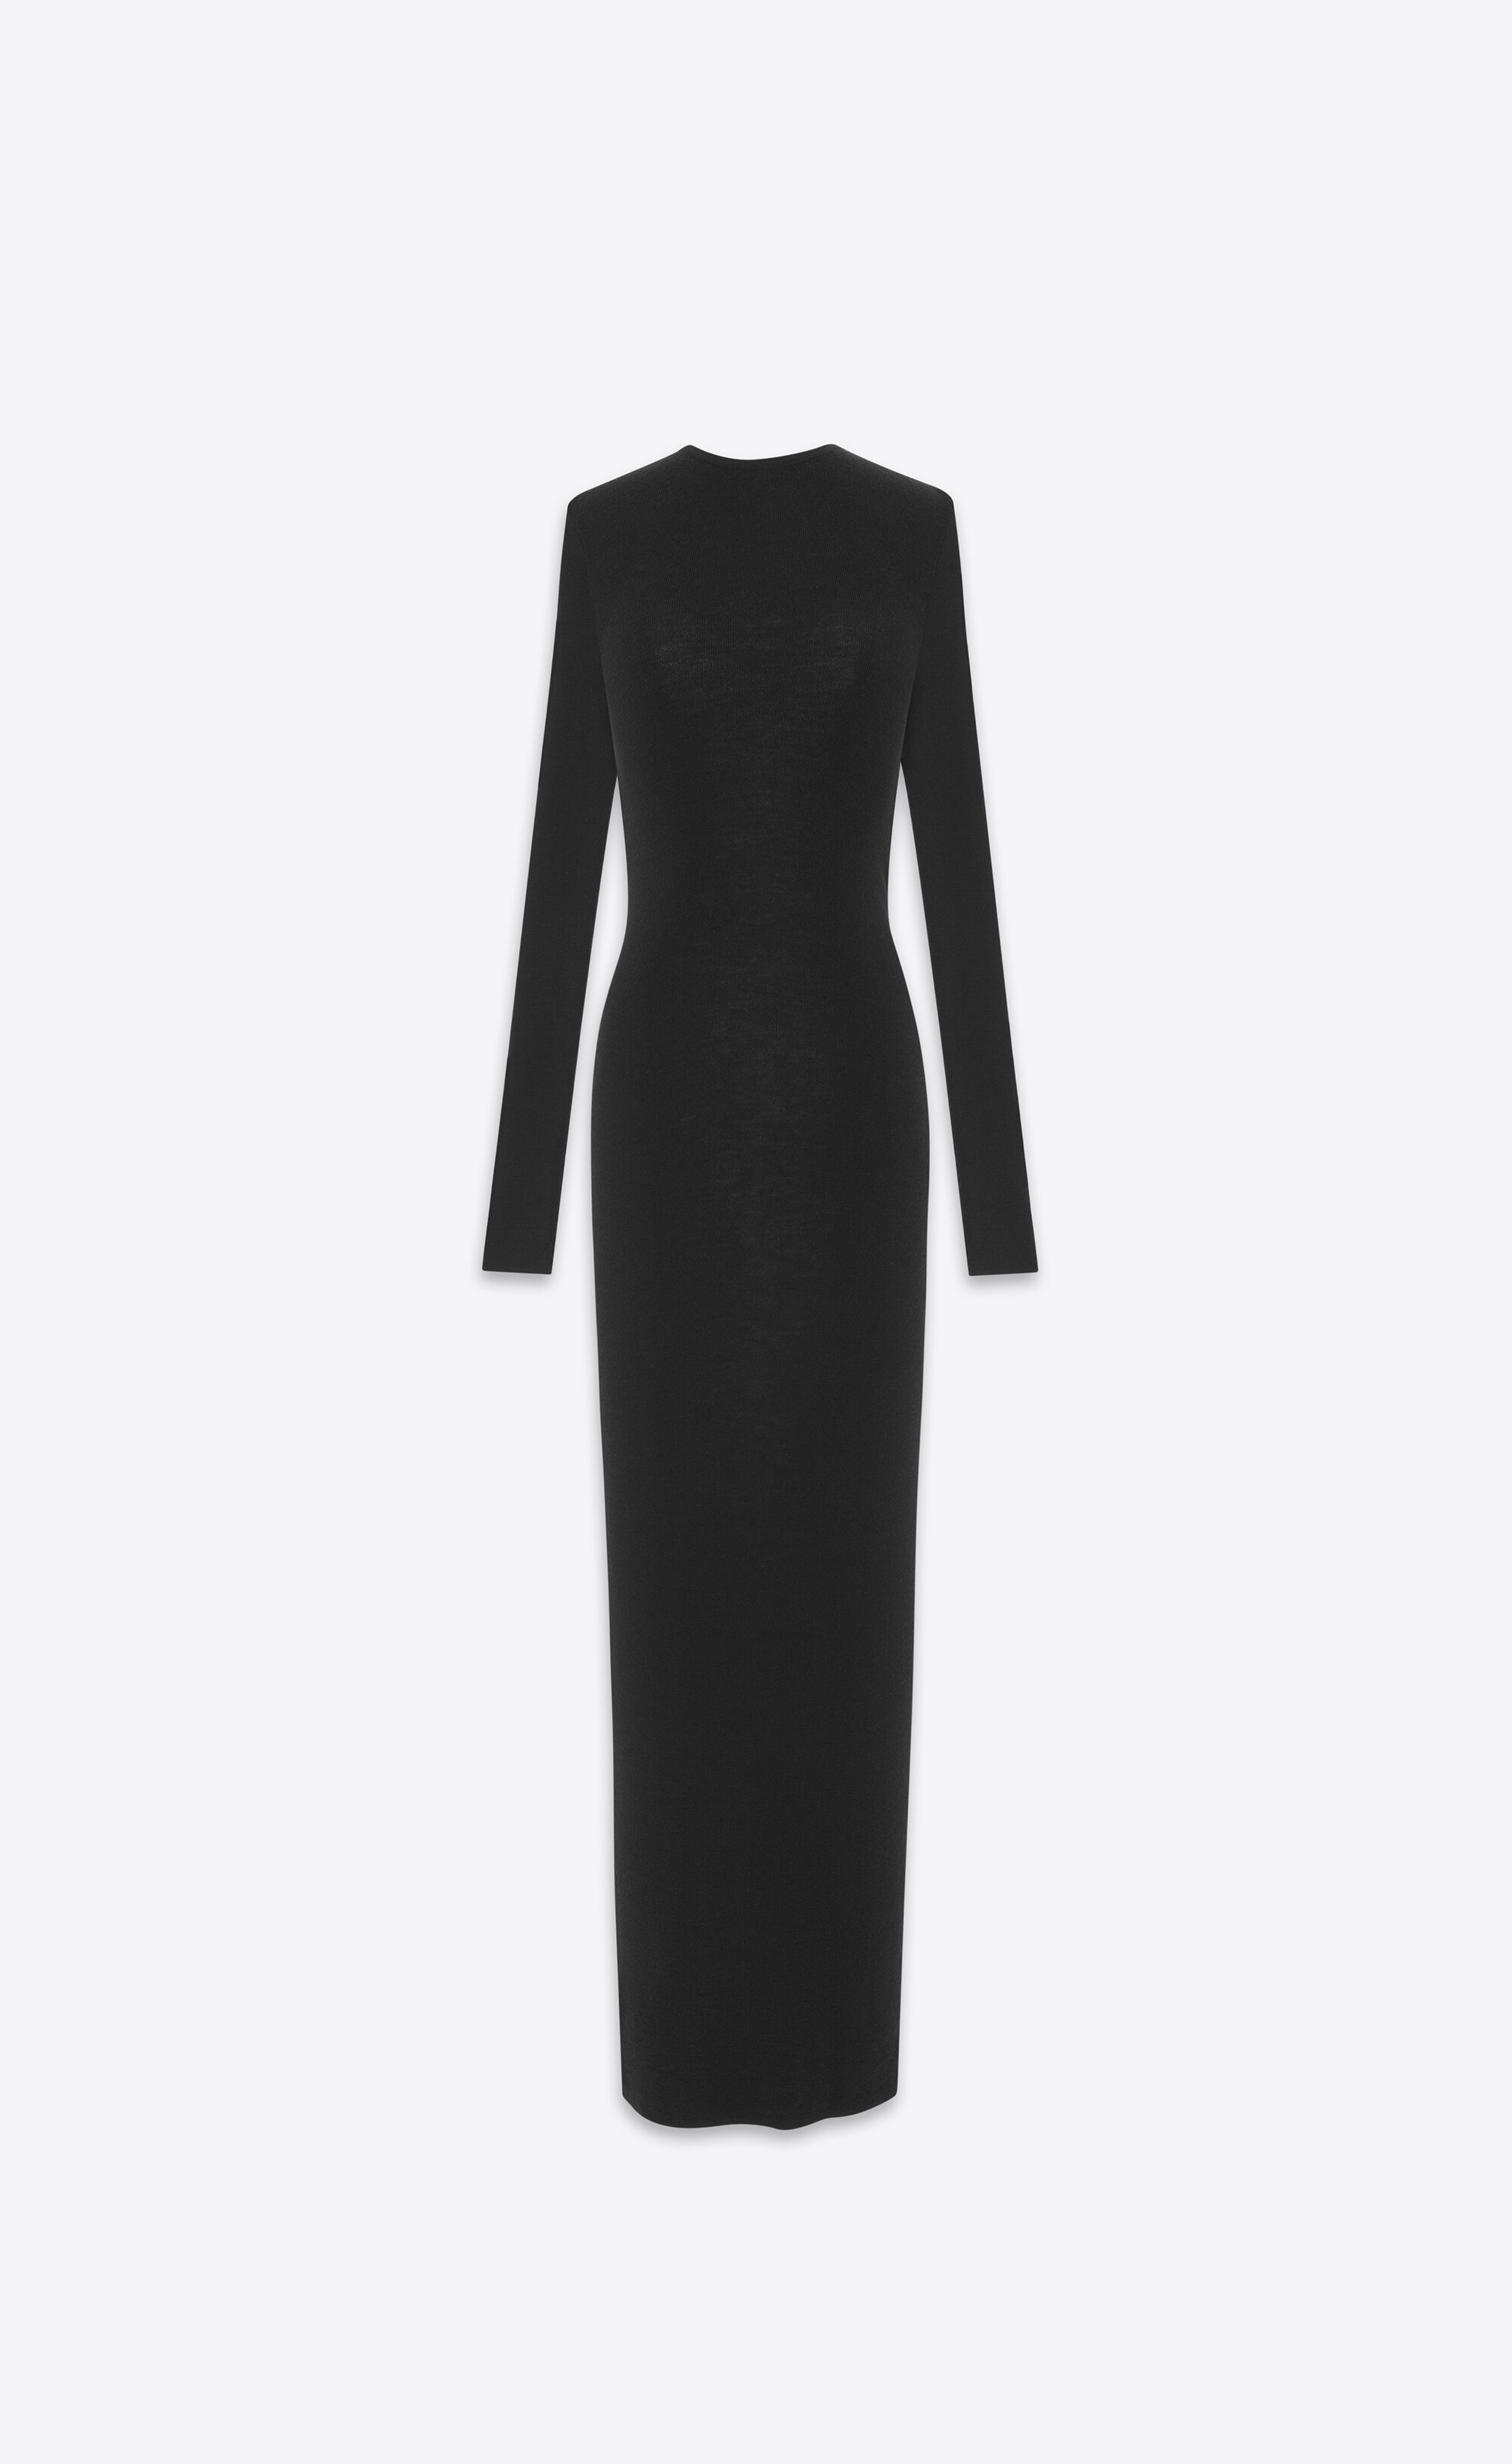 open-back dress in cashmere, wool and silk - 1